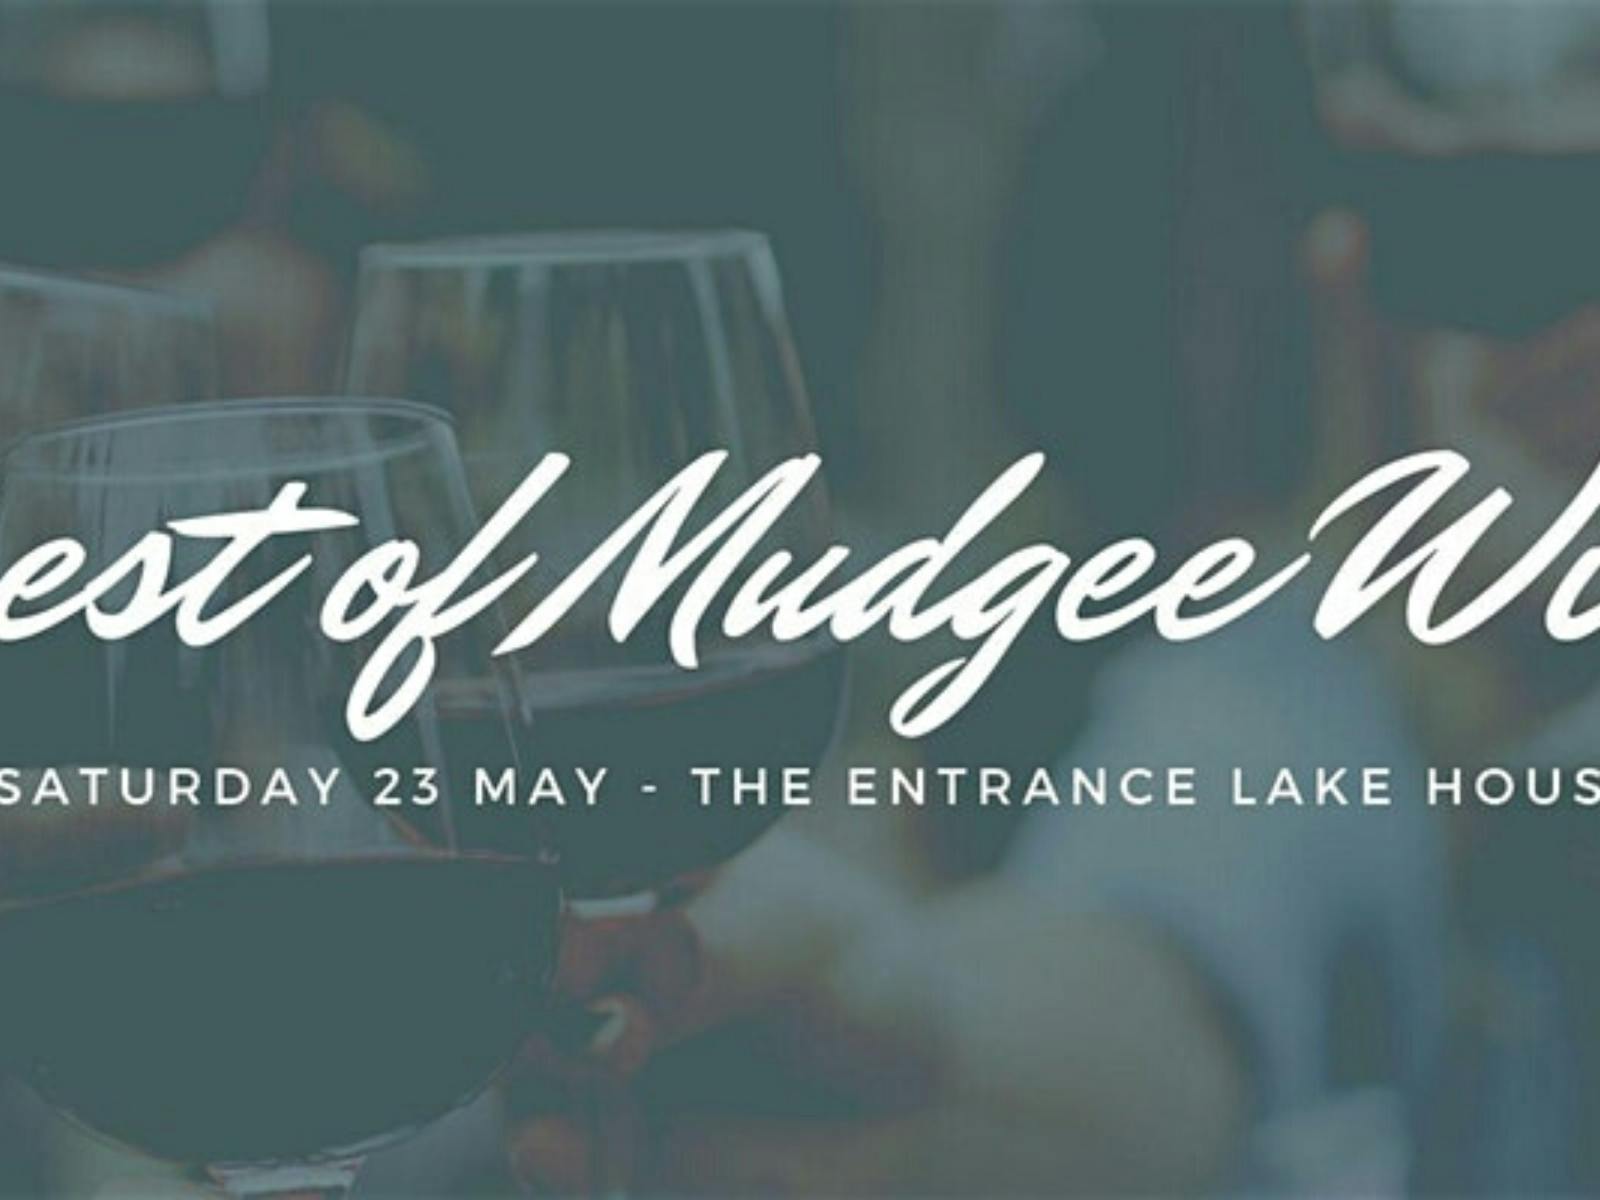 Image for Best of Mudgee Wines at The Entrance Lake House